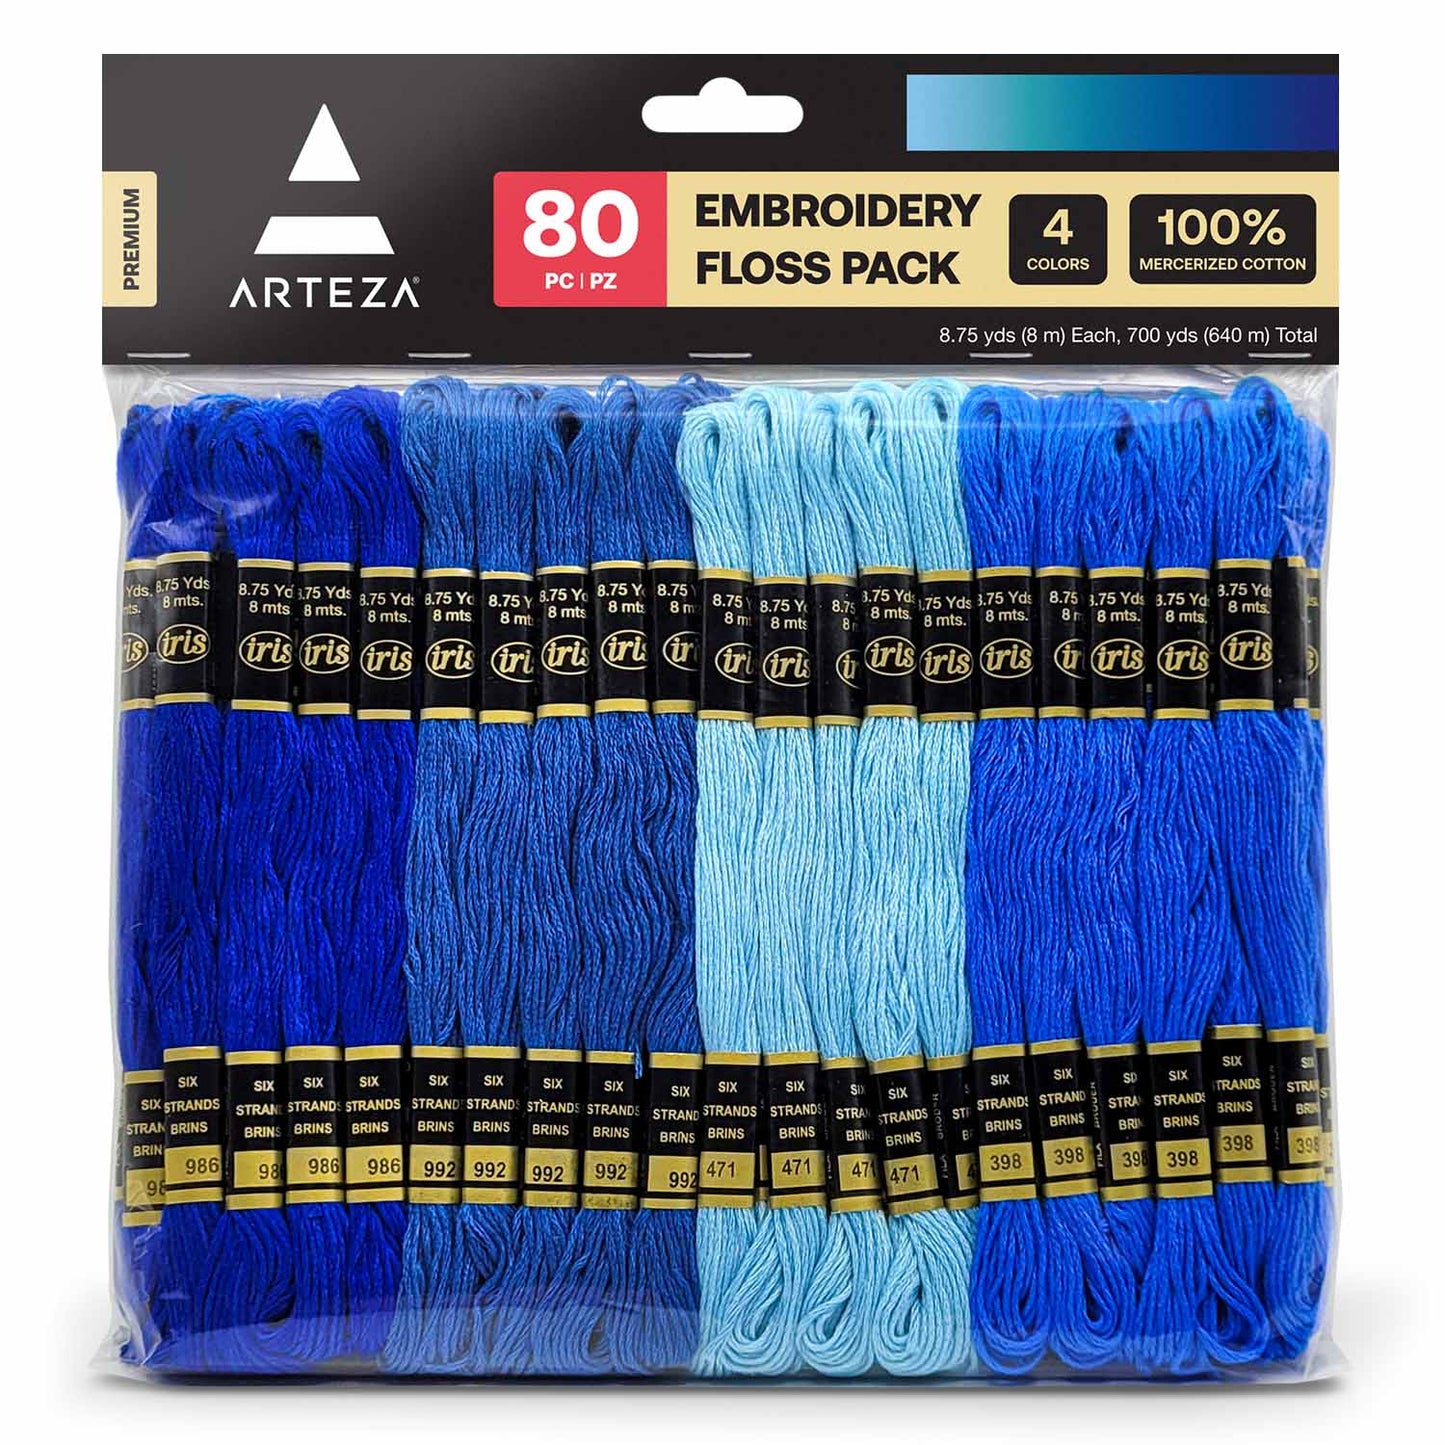 Arteza Embroidery Floss, 35 Colors - 144 Pieces